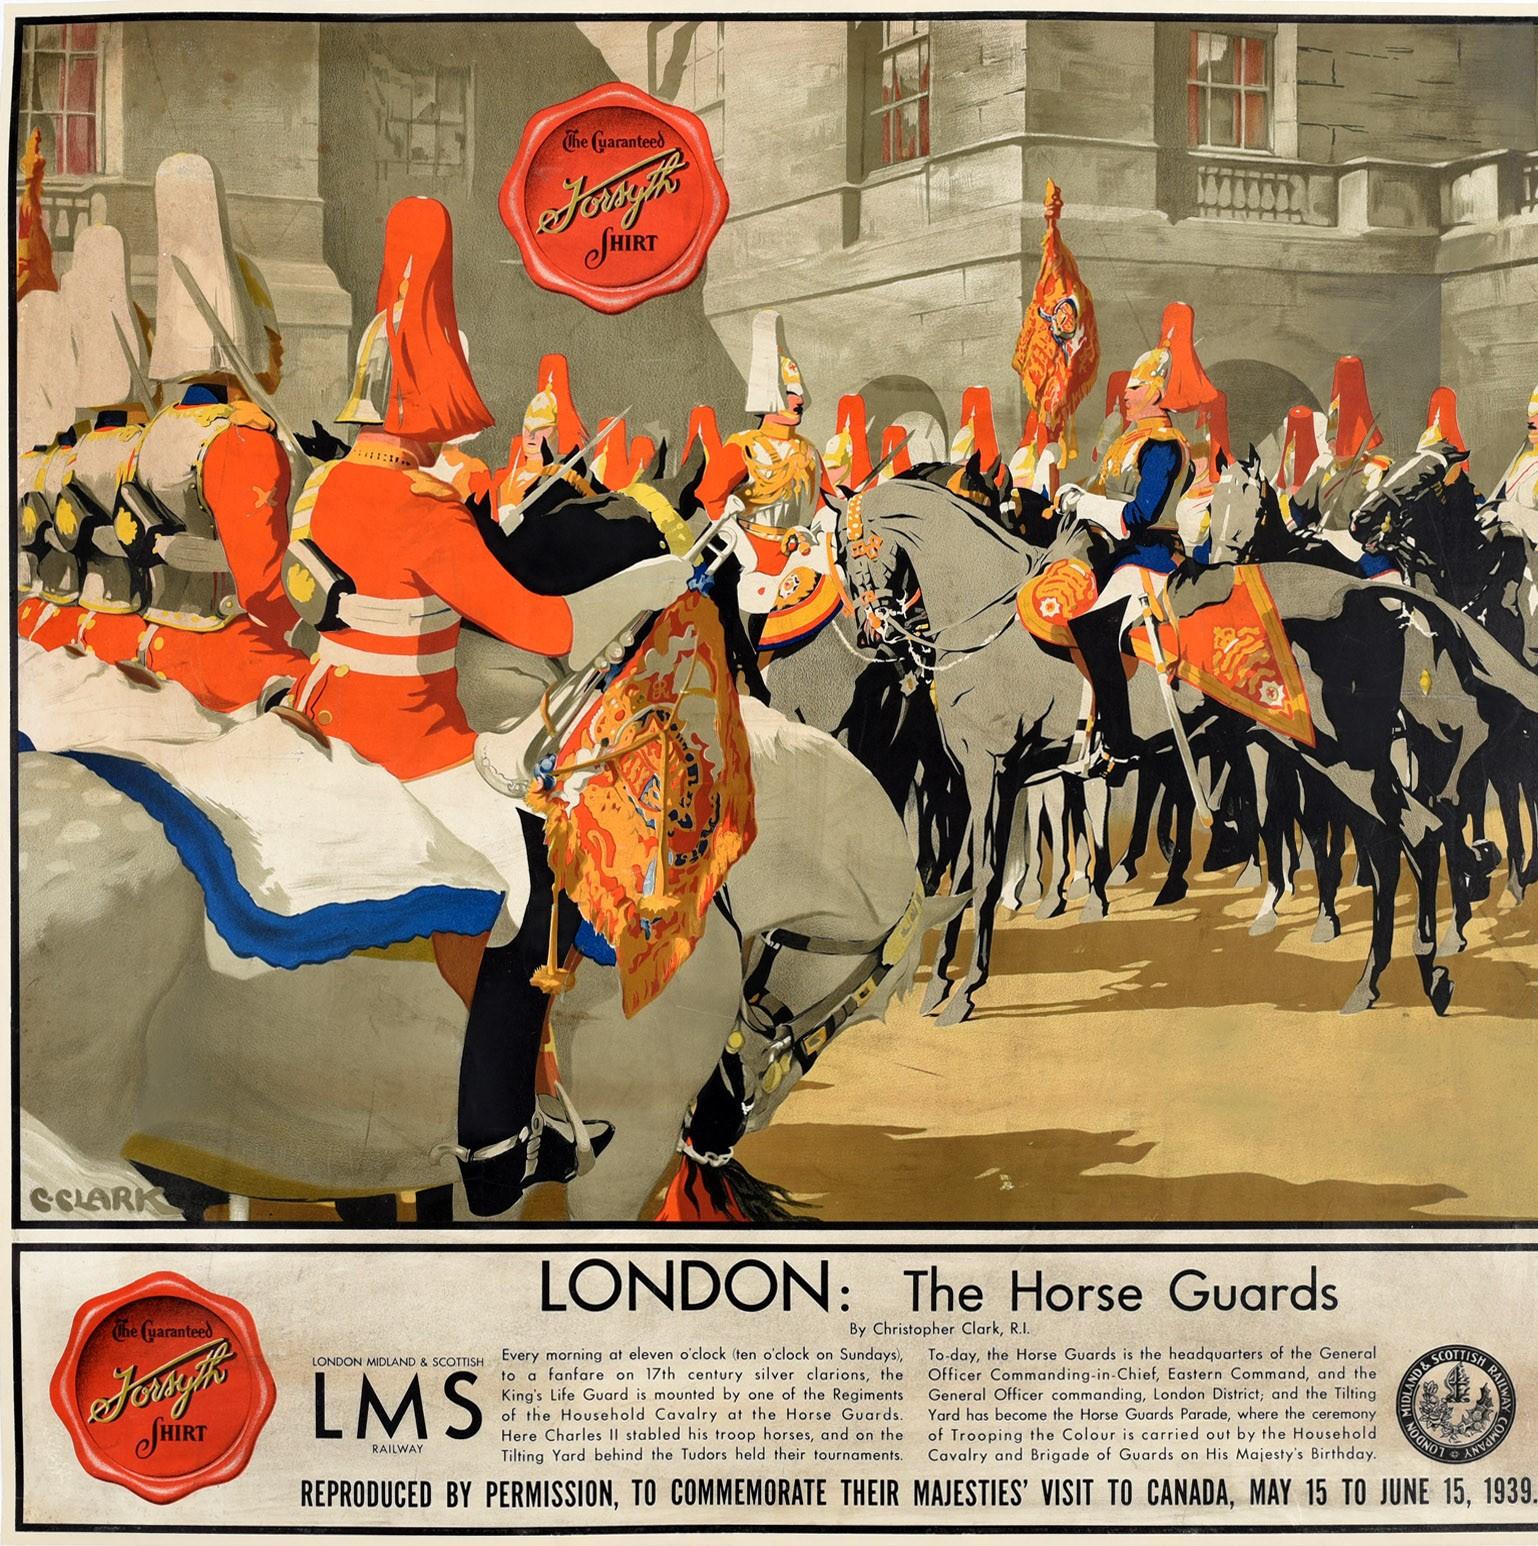 Original vintage poster entitled London The Horse Guards originally issued by the LMS London Midland and Scottish railway and re-issued in 1939 by the outfitters FW Forsyth Ltd (established 1872) - Reproduced by permission to Commemorate their